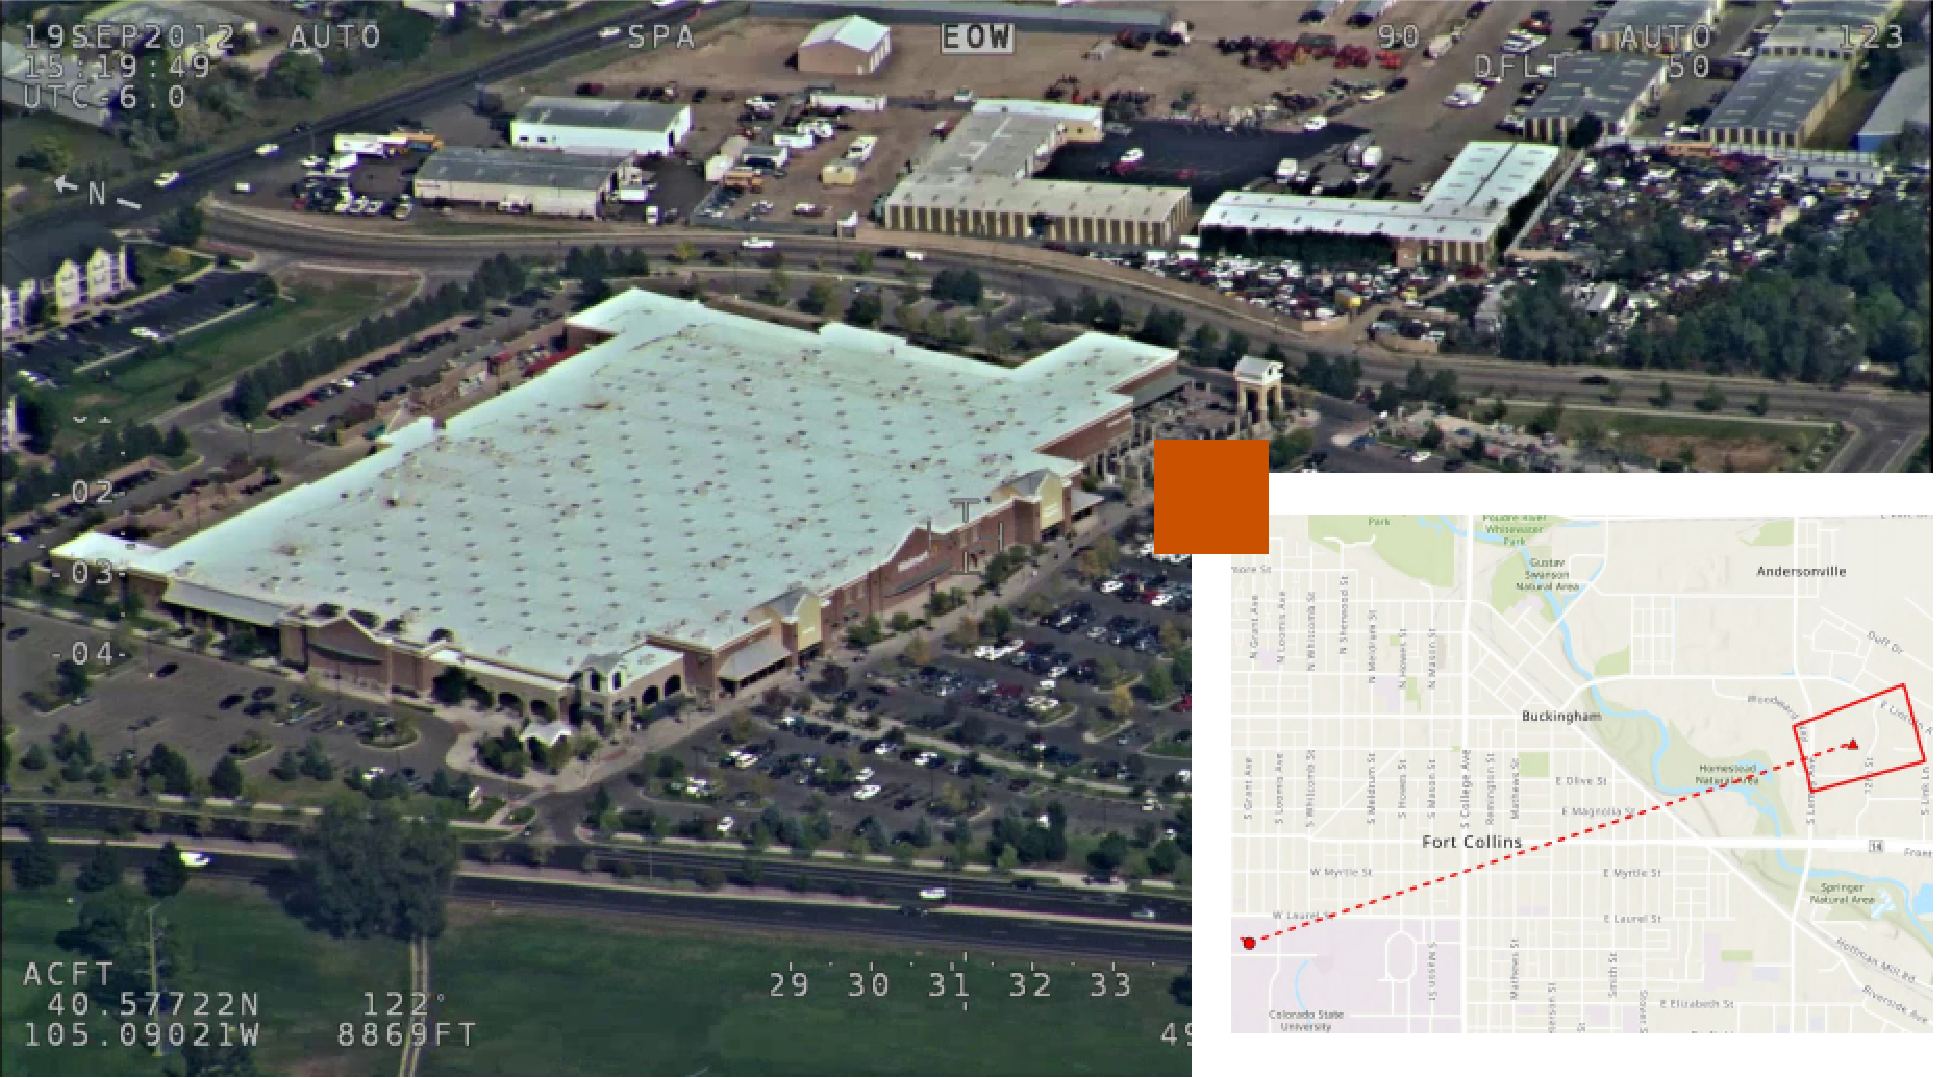 An aerial view of a large building surrounded by a parking lot superimposed with a map bisected by a dotted red line